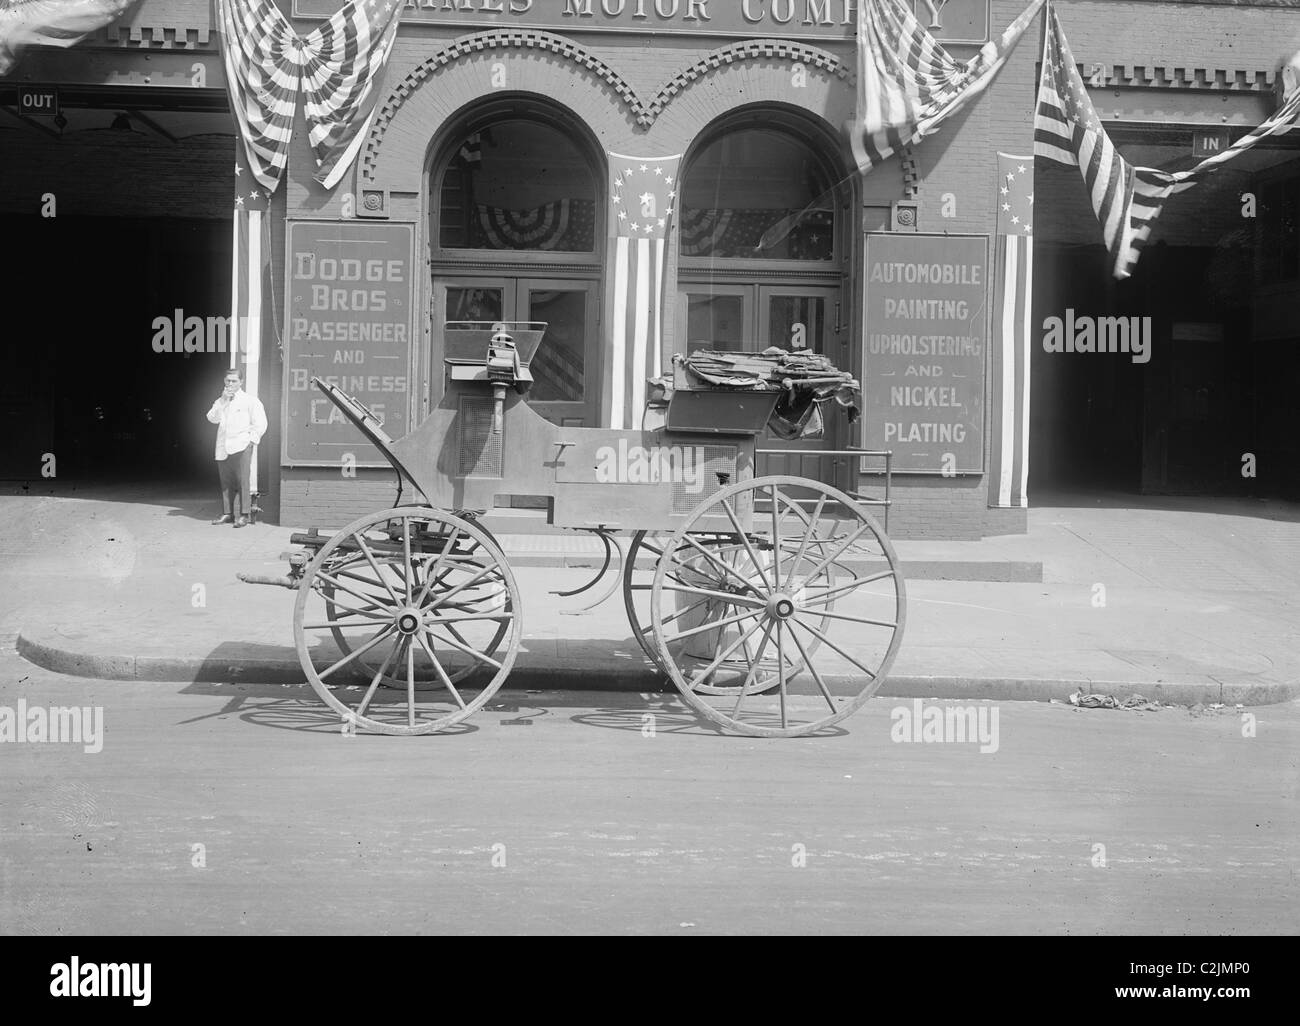 Grant Carriage in front of the Dodge Brothers Passenger and Business Cars. Stock Photo